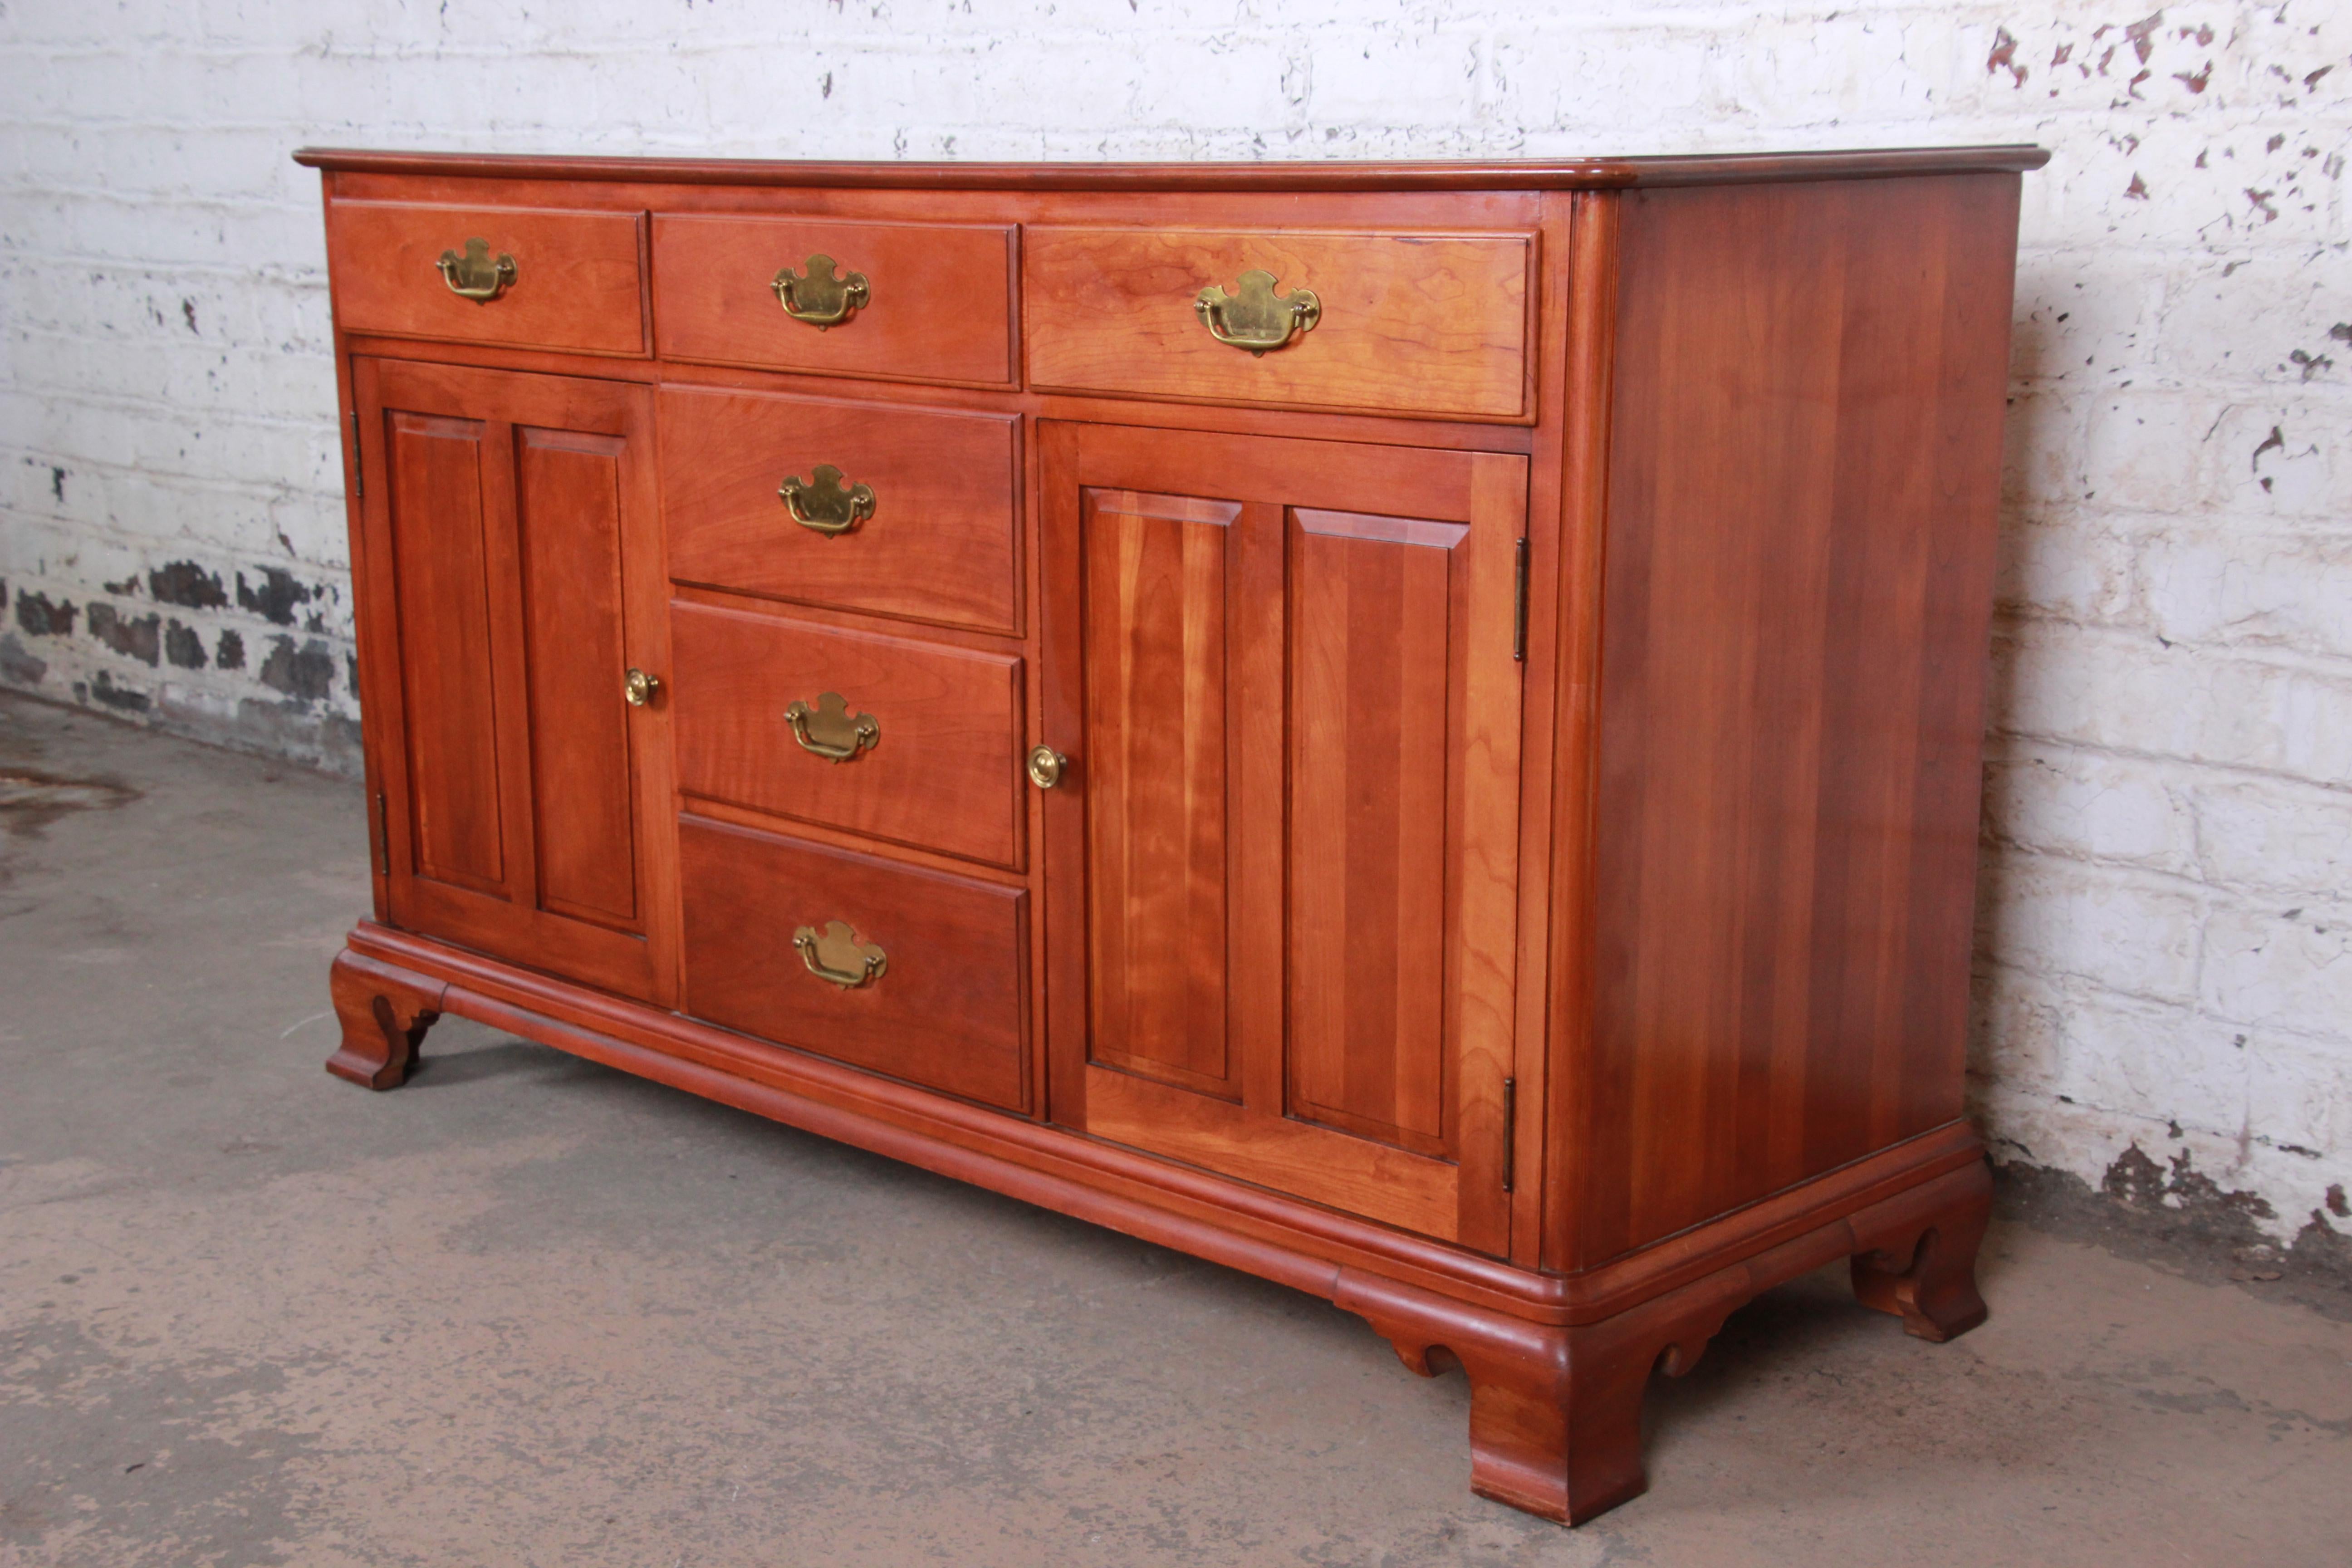 British Colonial Midcentury Solid Cherrywood Sideboard Credenza by Willet